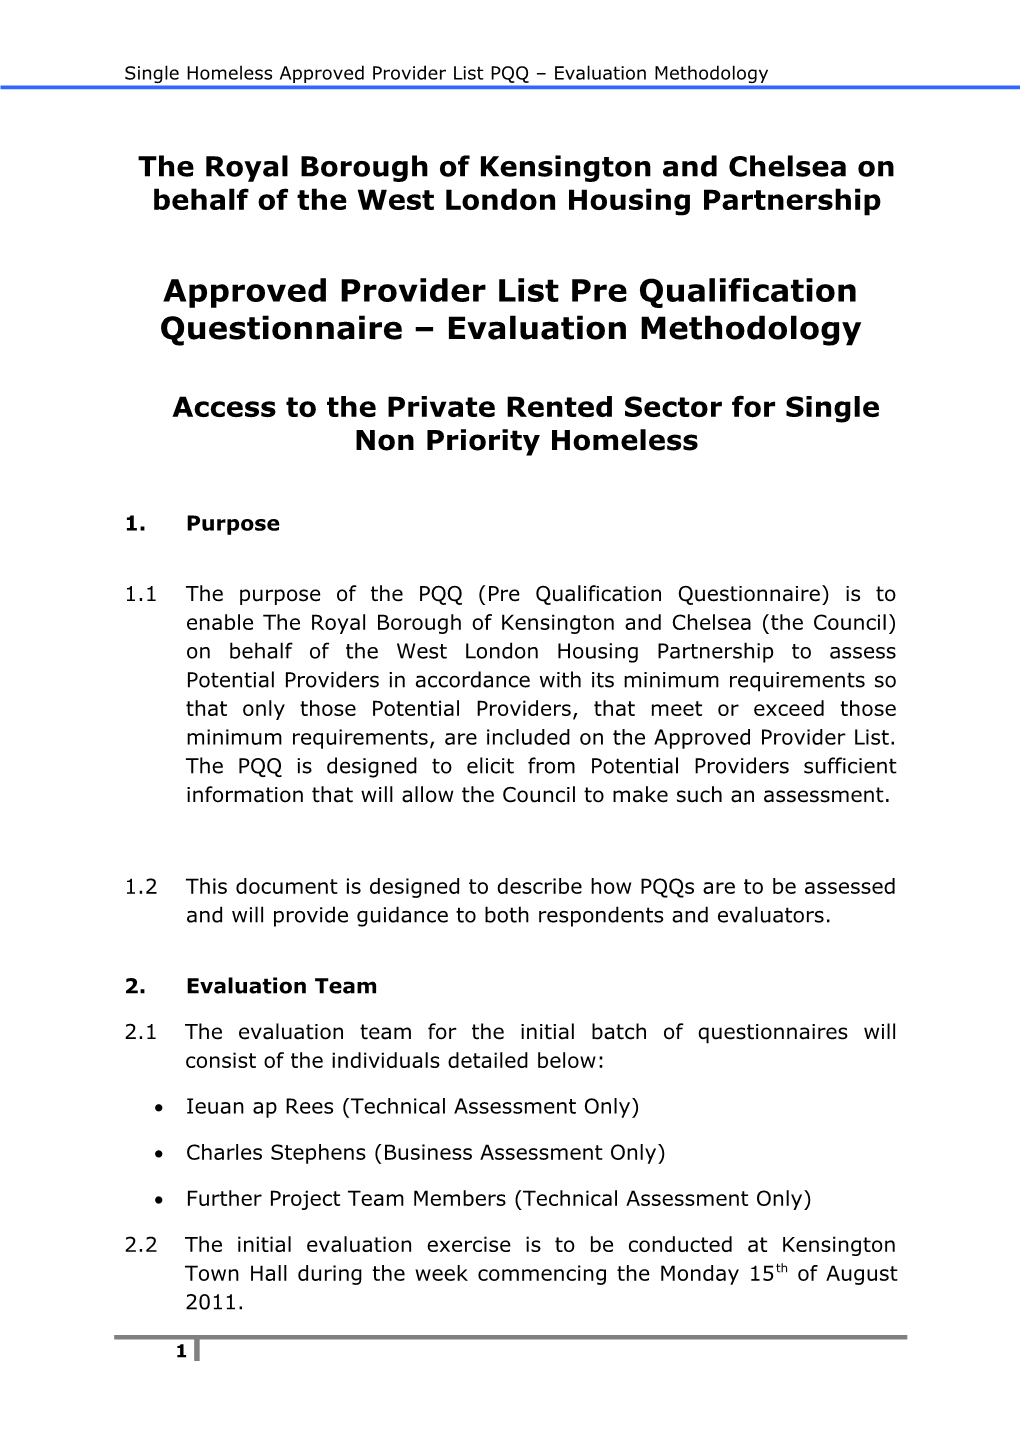 Approved Provider List Pre Qualification Questionnaire Evaluation Methodology